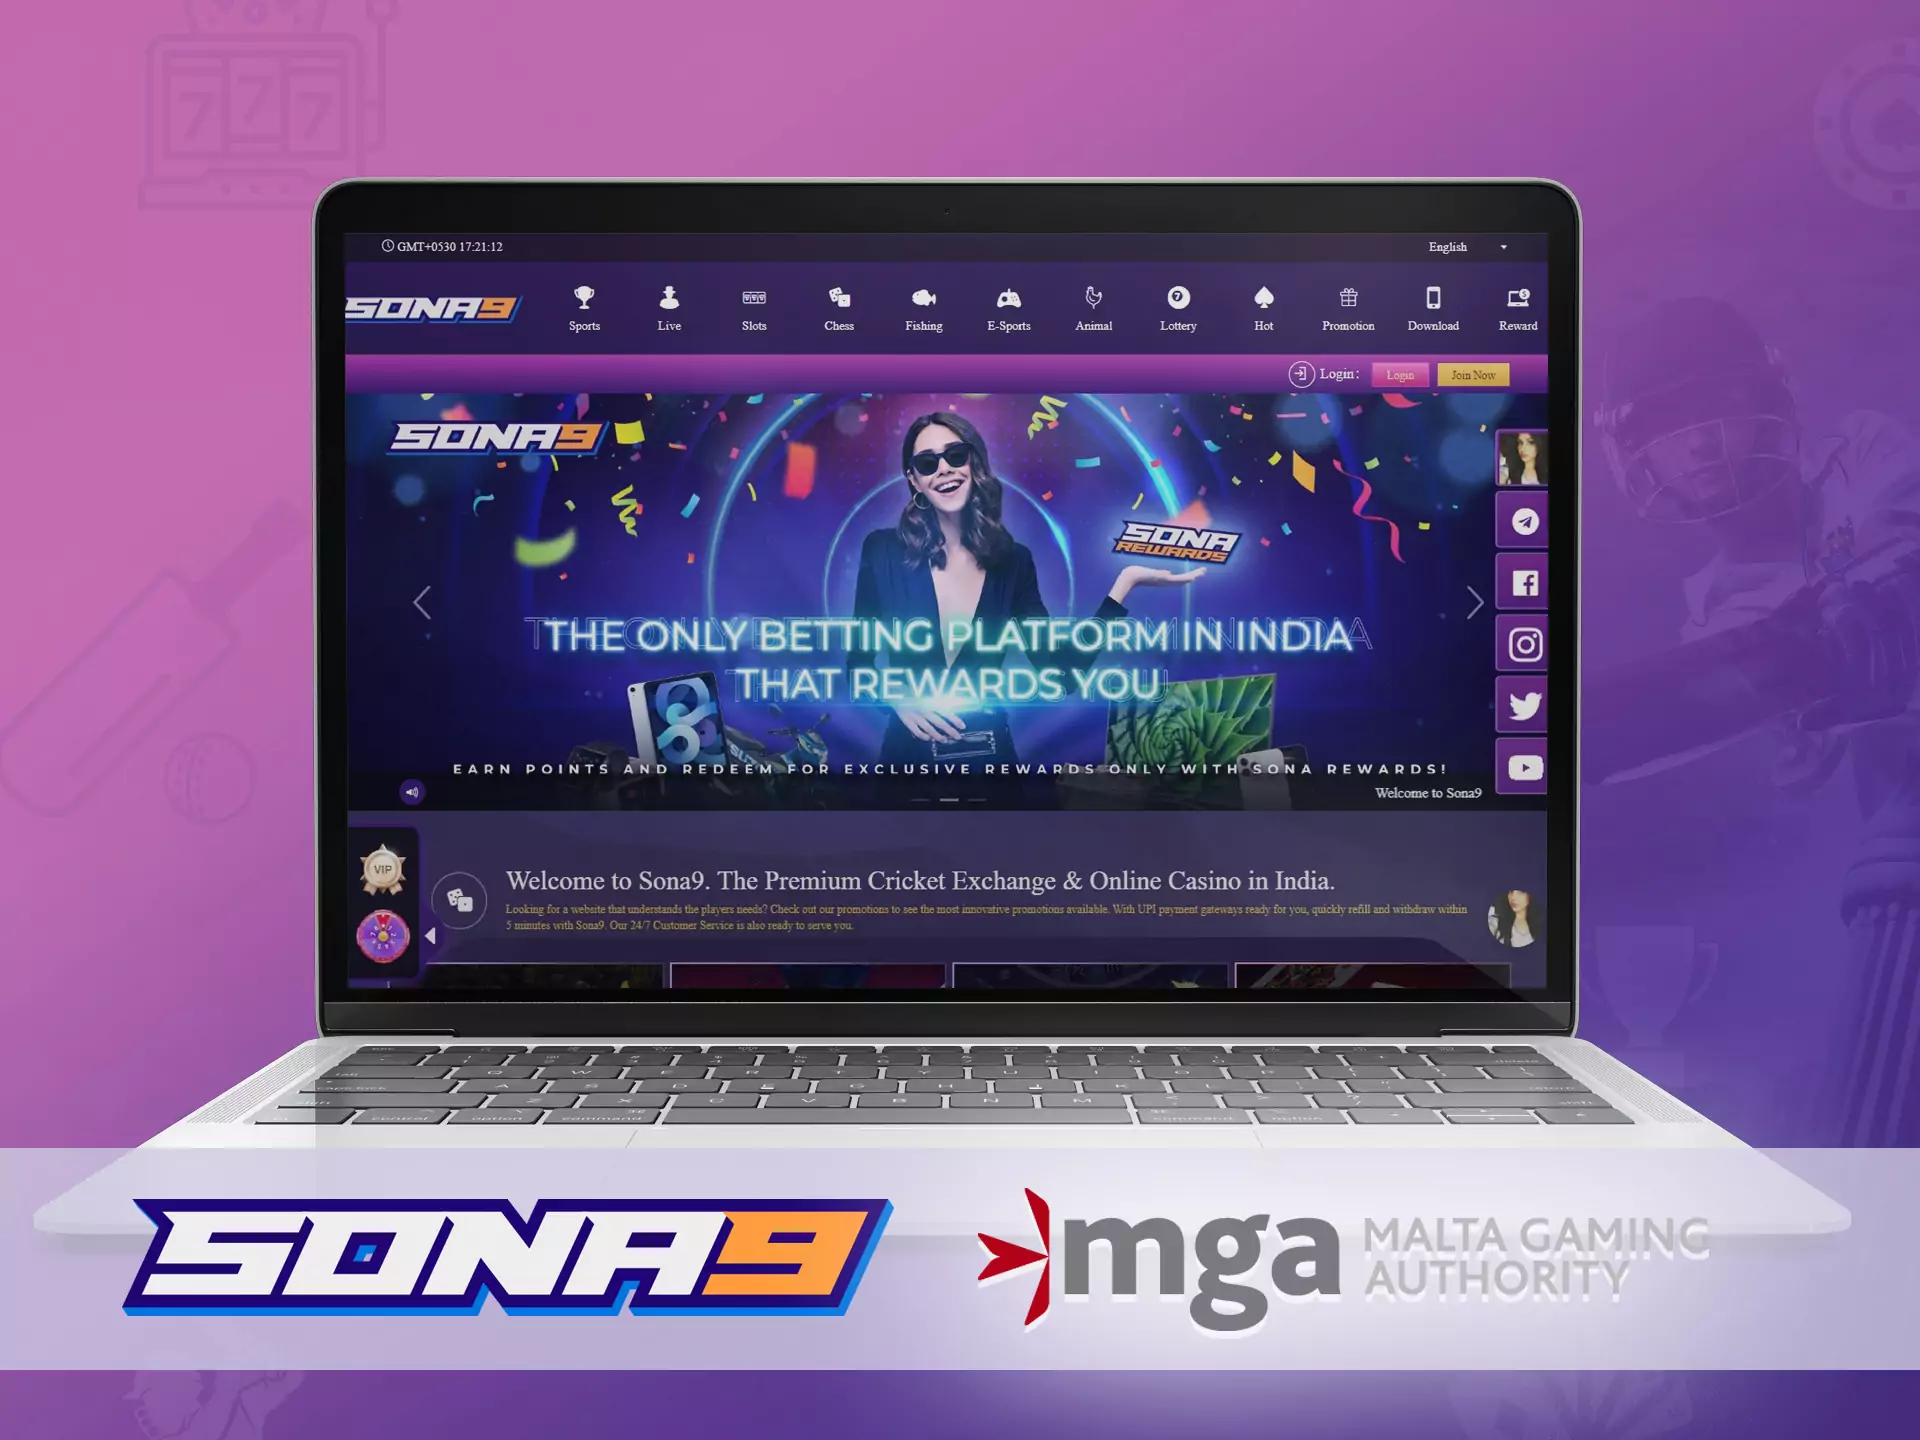 Sona9 works legally online thanks to the Malta Gaming license.